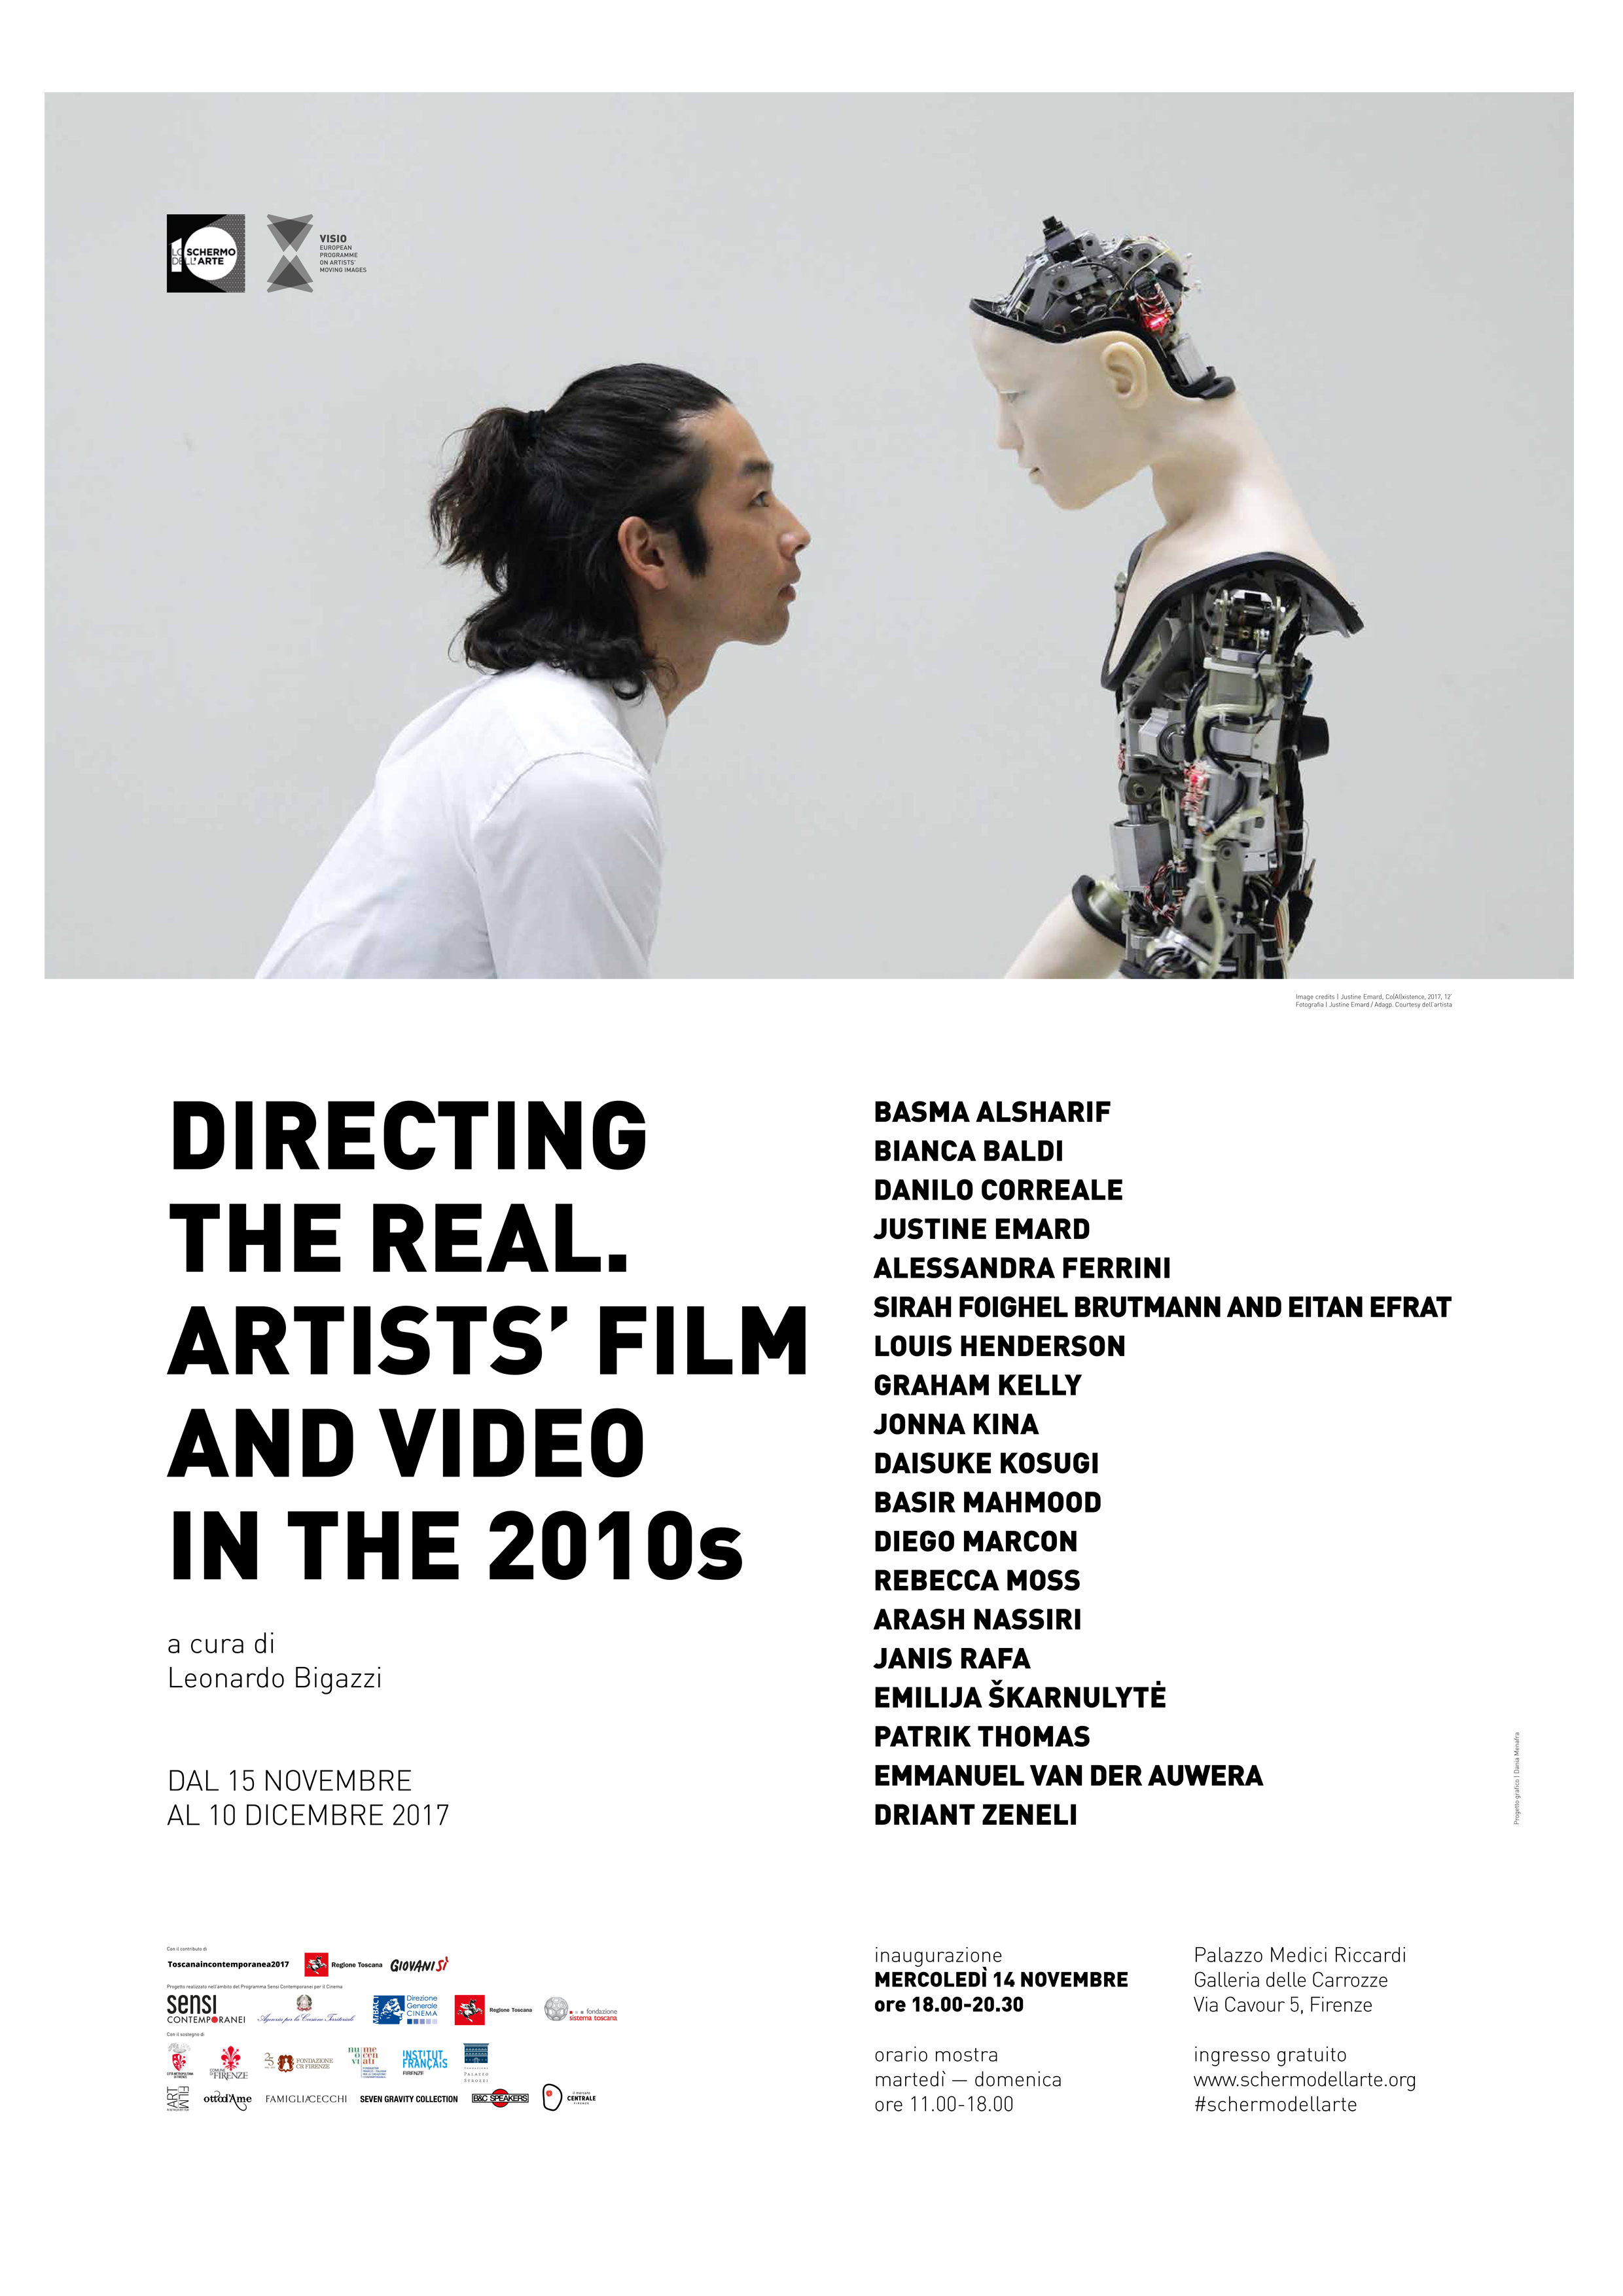 Directing the real. Artists’ film and video in the 2010s